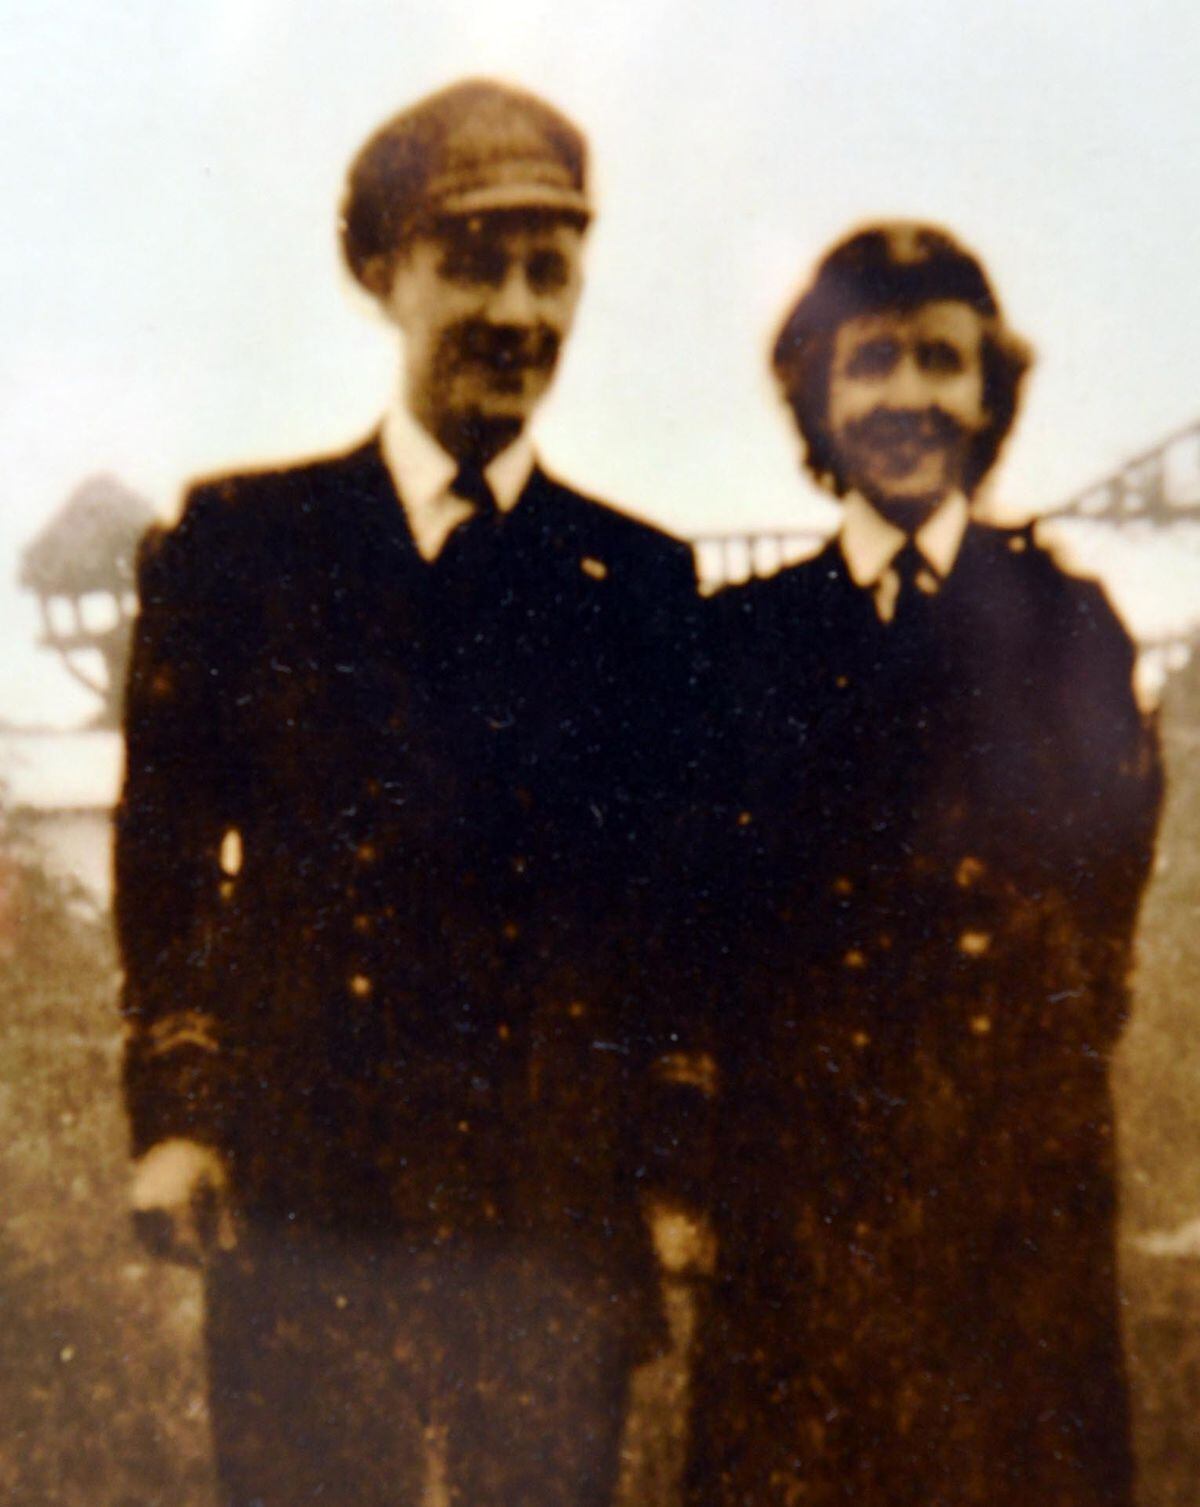 Geoff with his wife, Betty, who was a petty officer in the WRNS, taken in 1957.